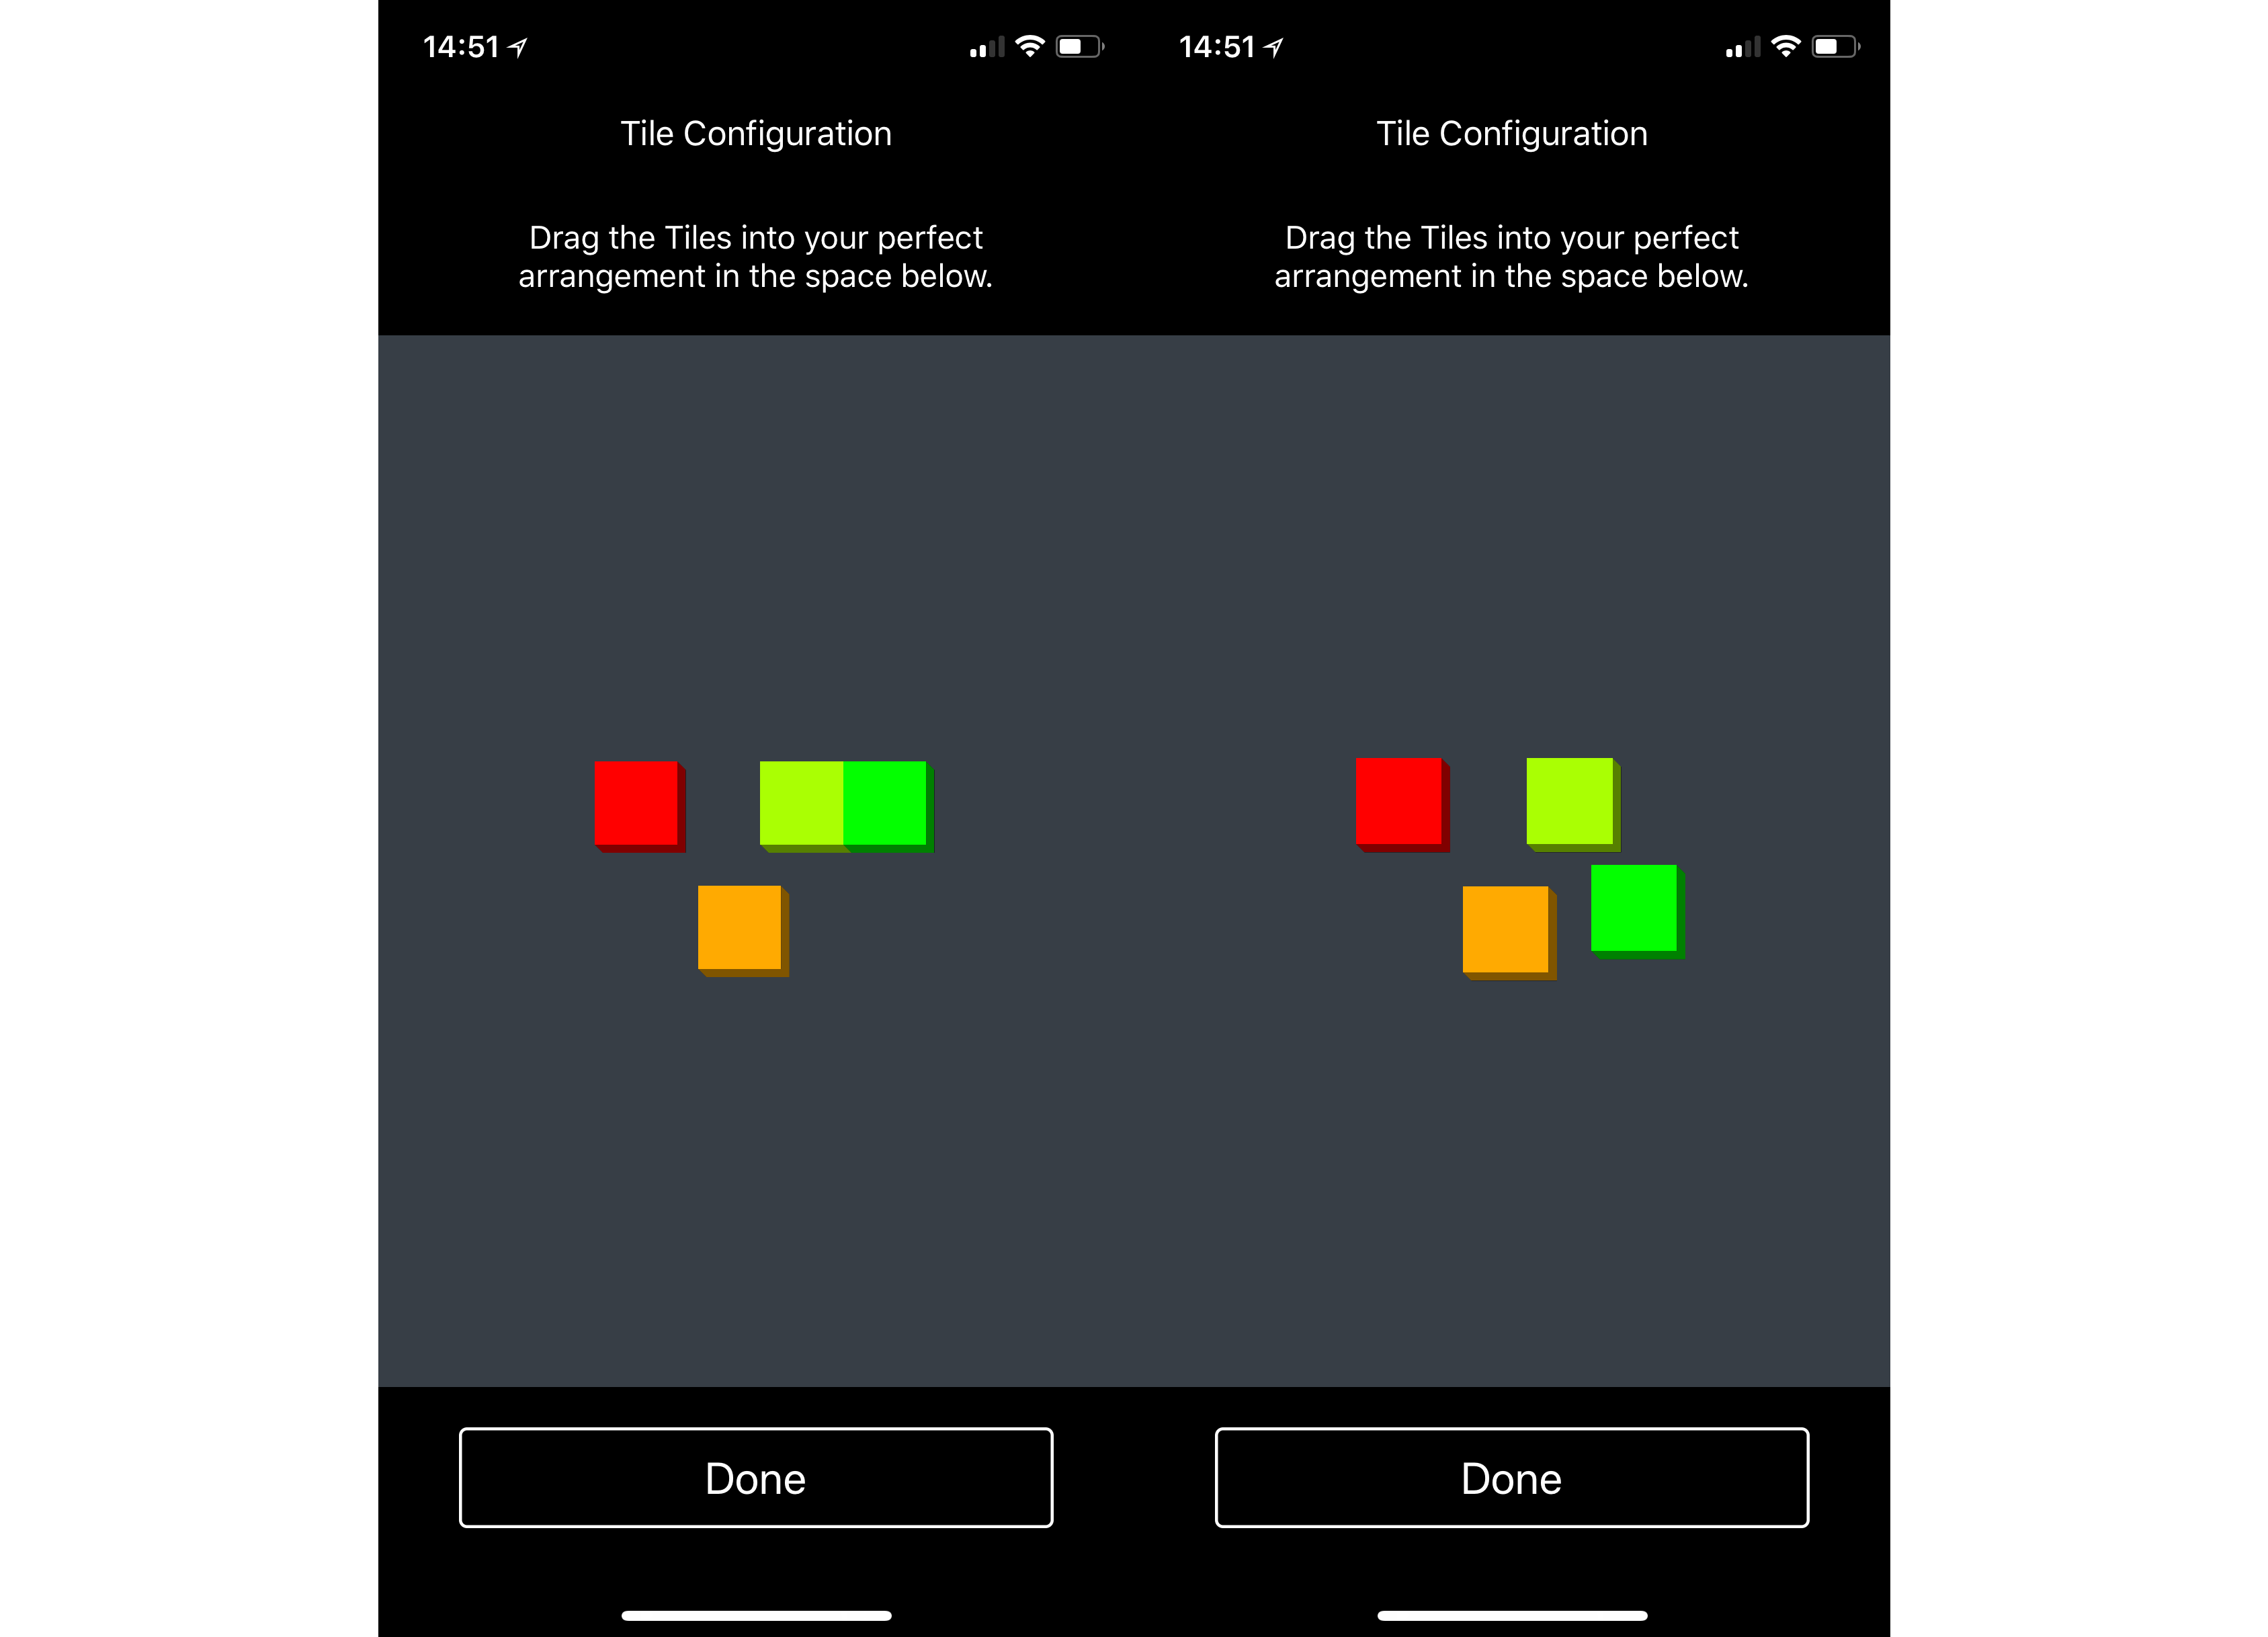 Screenshot of LIFX Tile configuration interface on a smartphone.